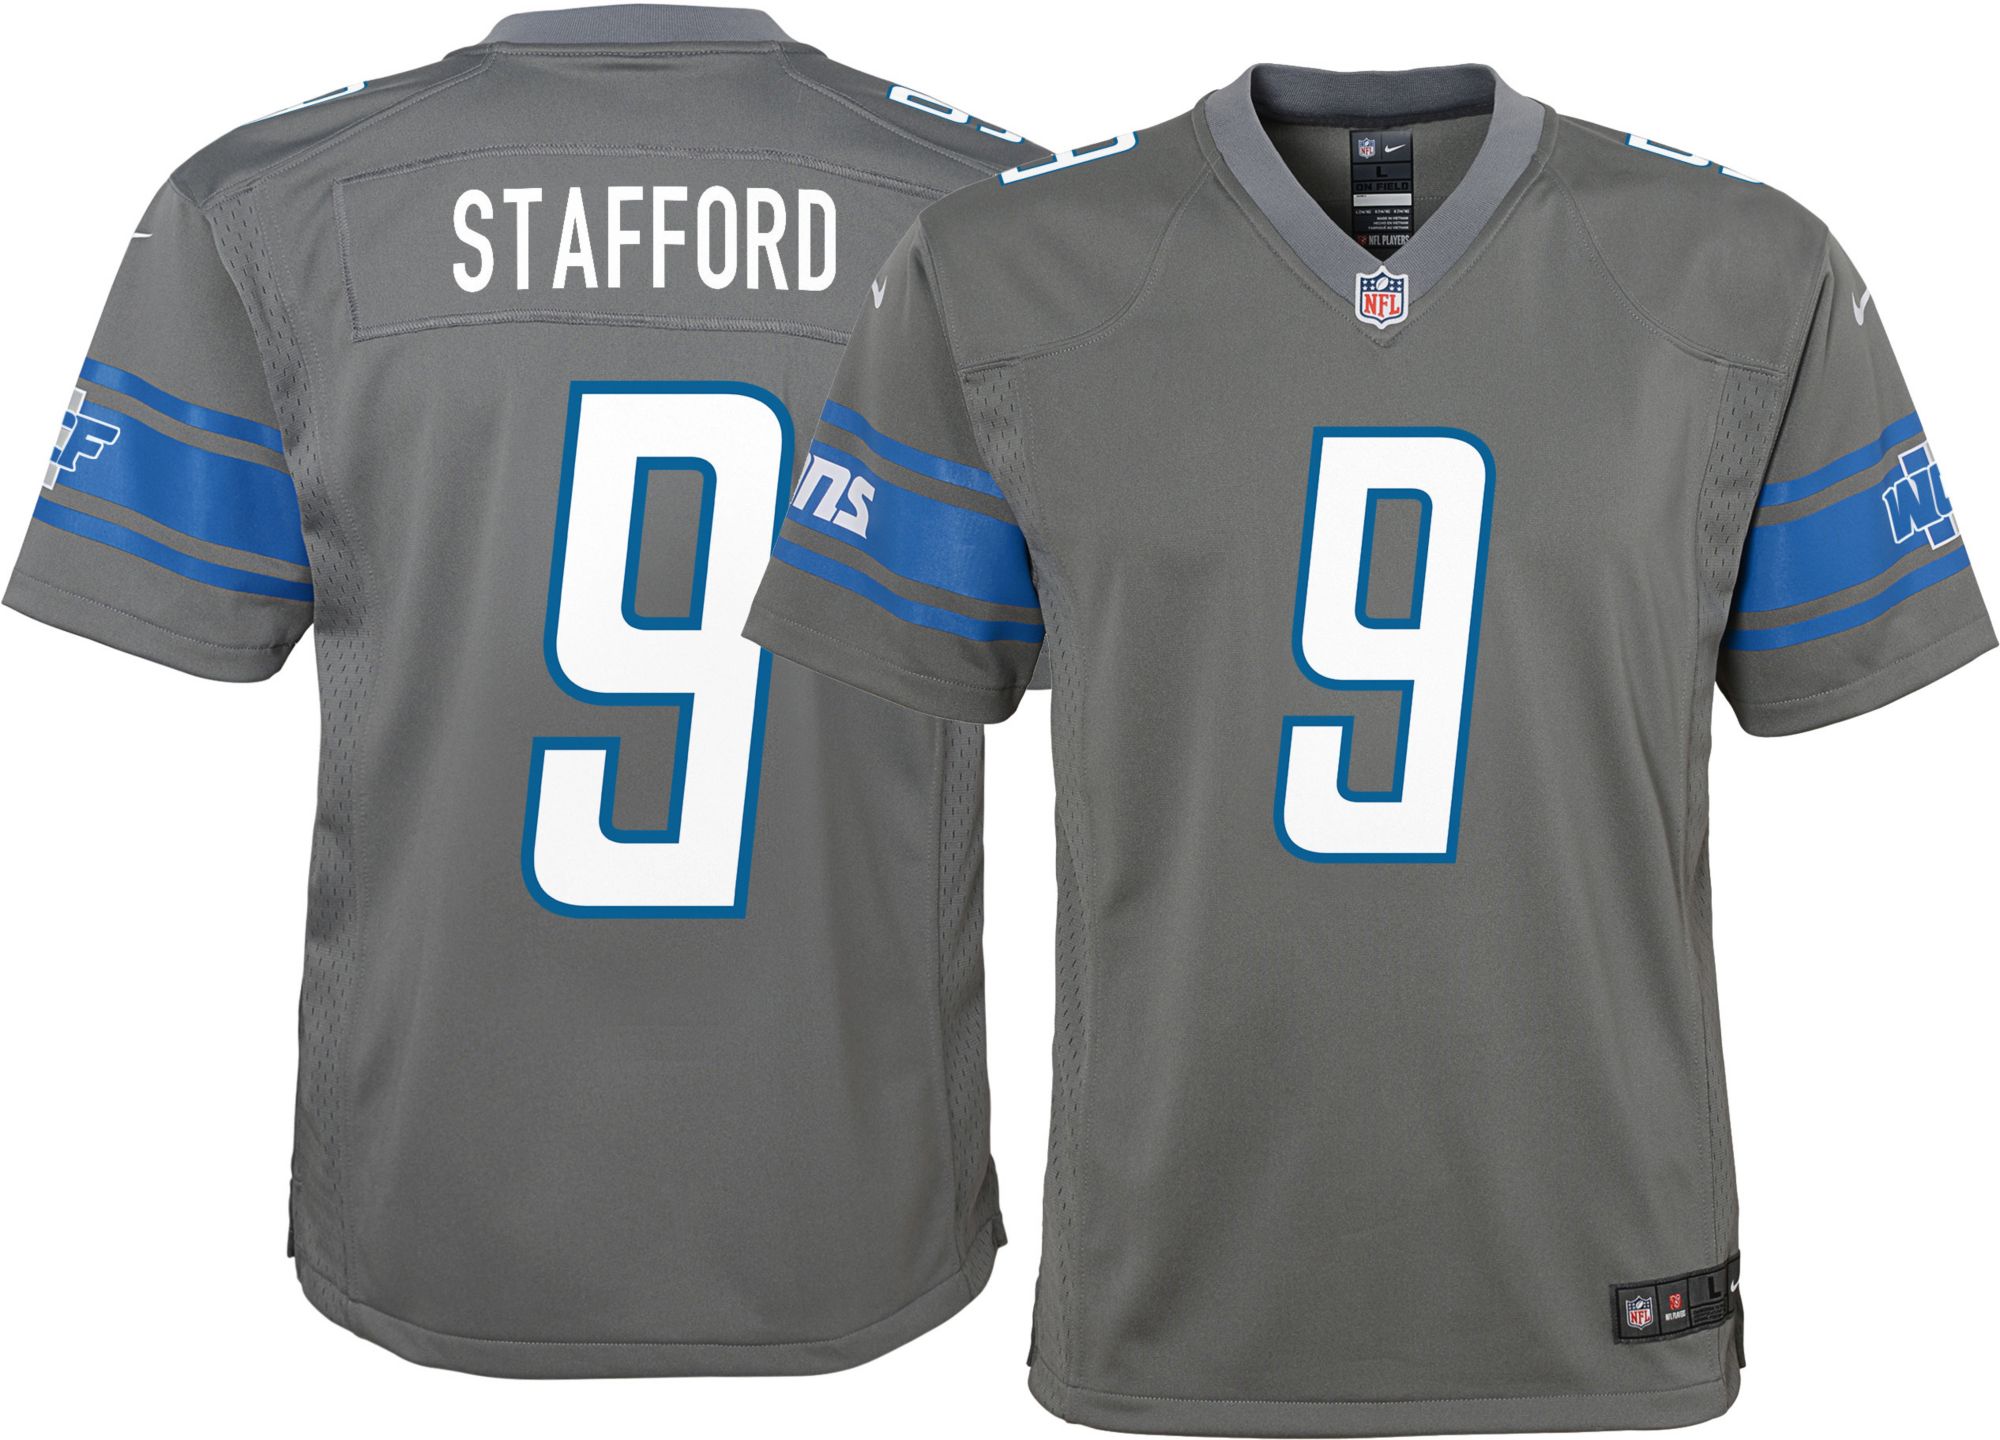 stafford youth jersey